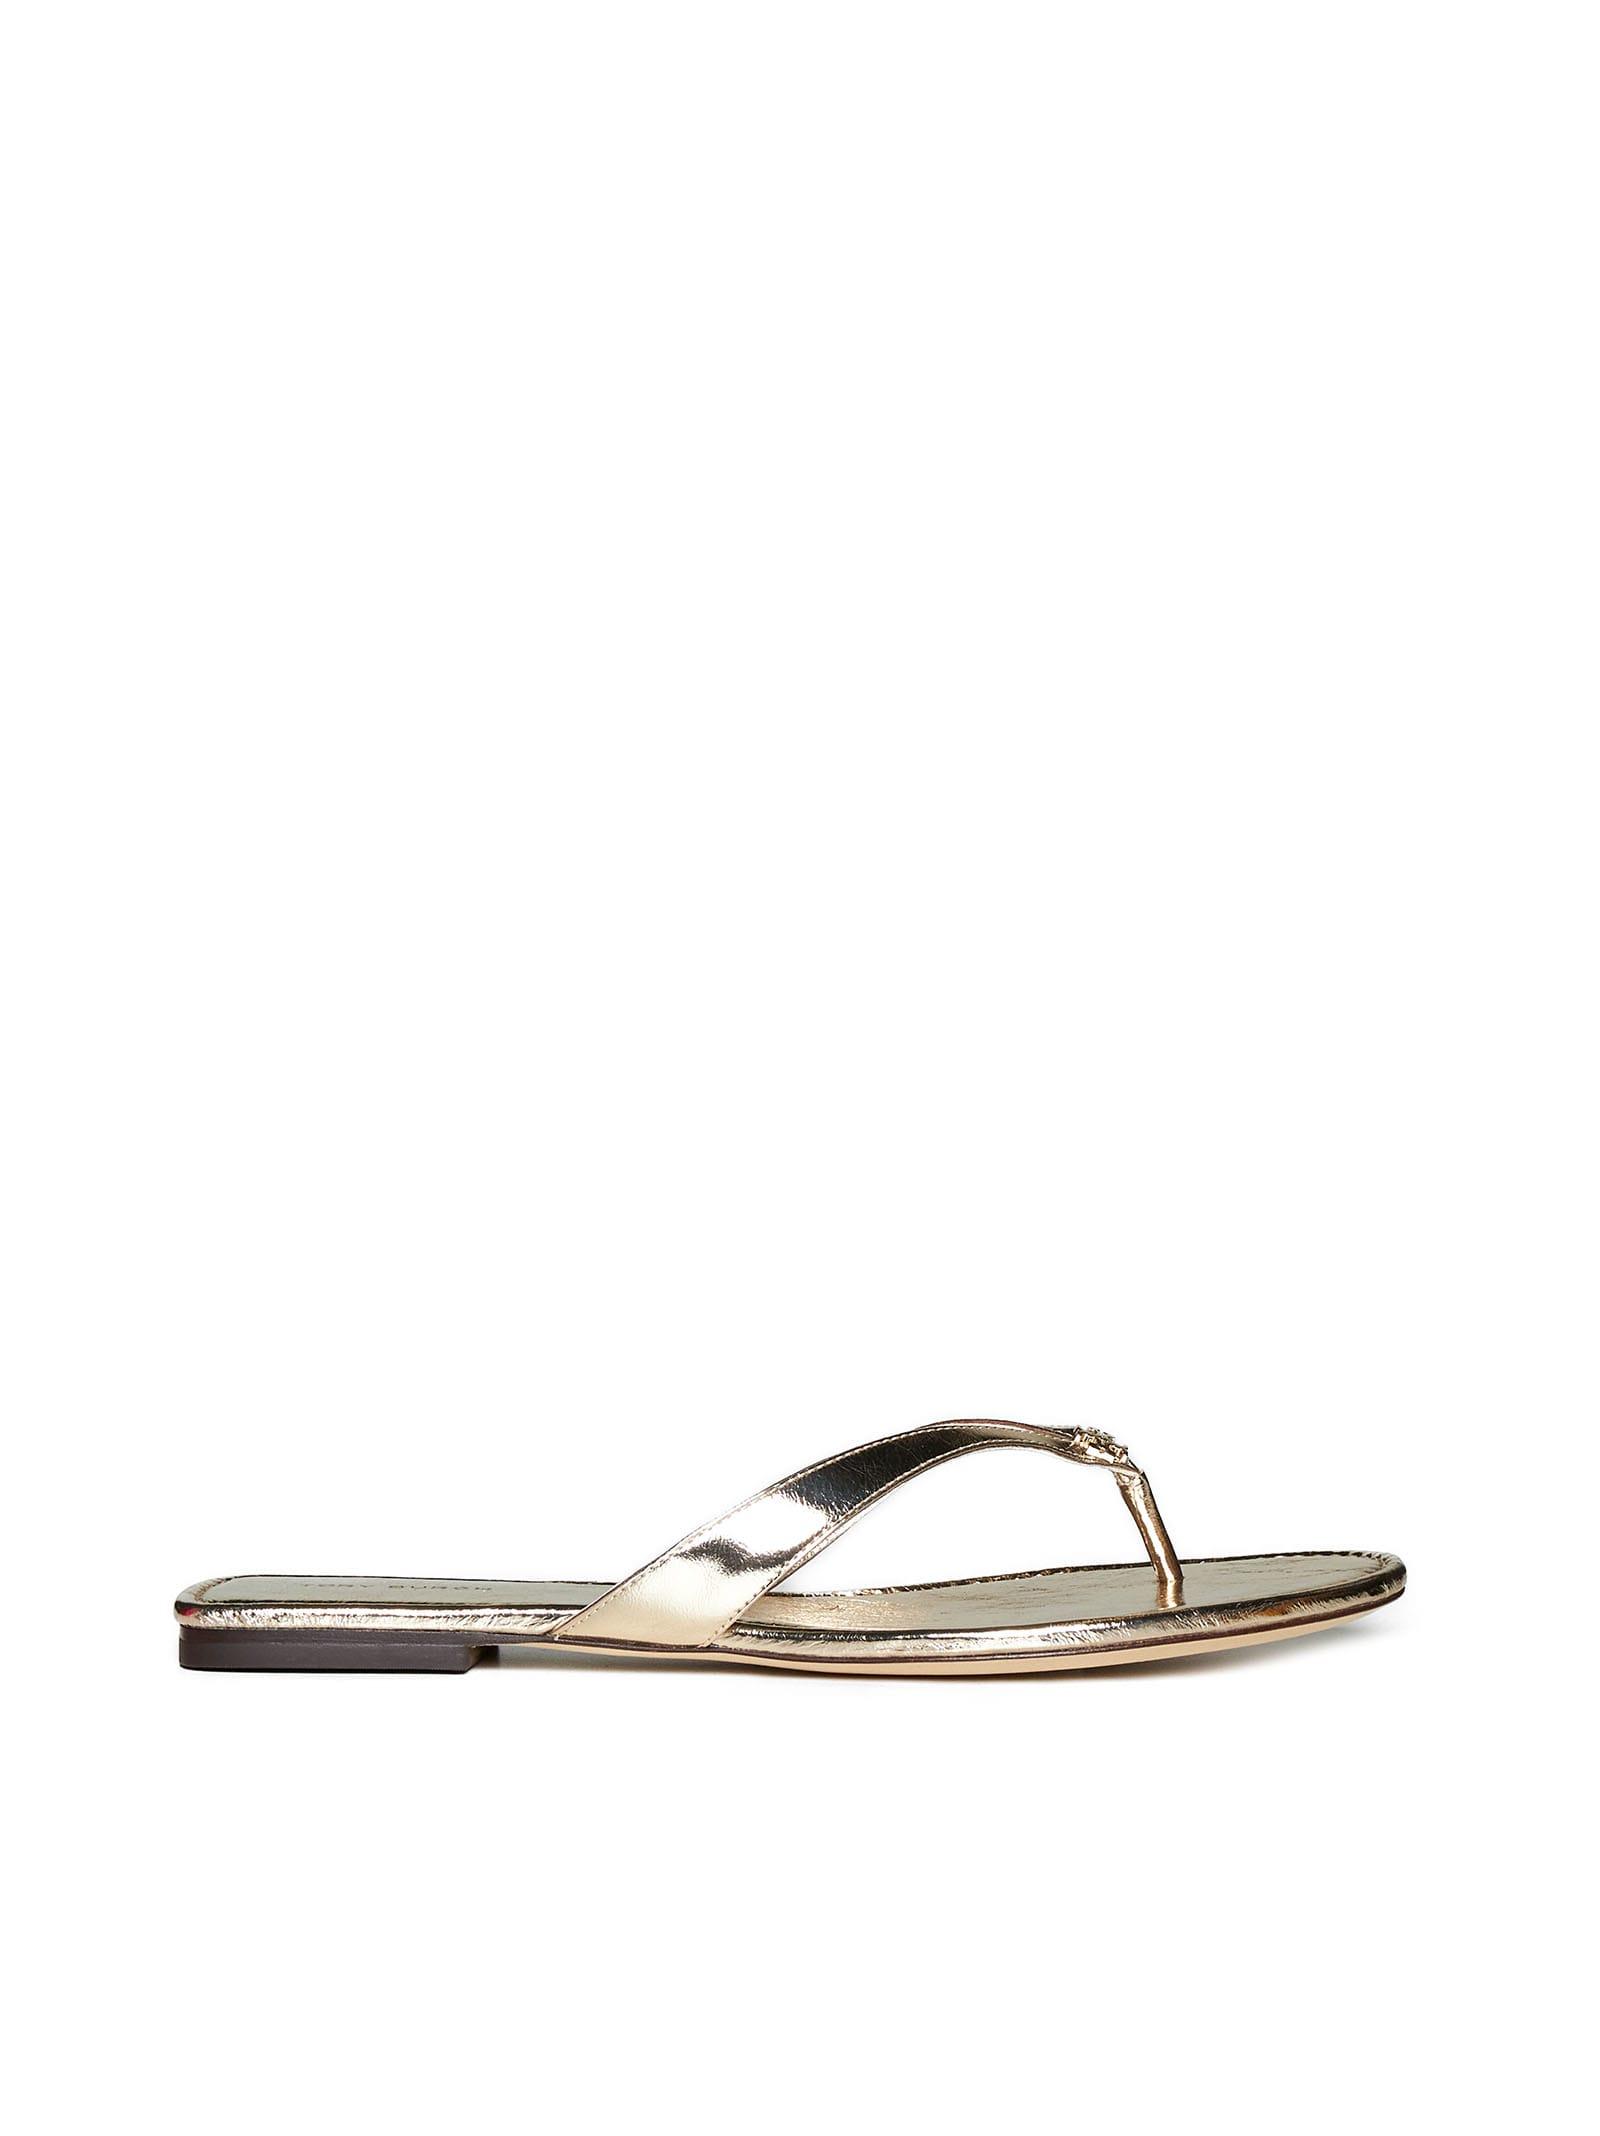 Tory Burch Sandals in White | Lyst